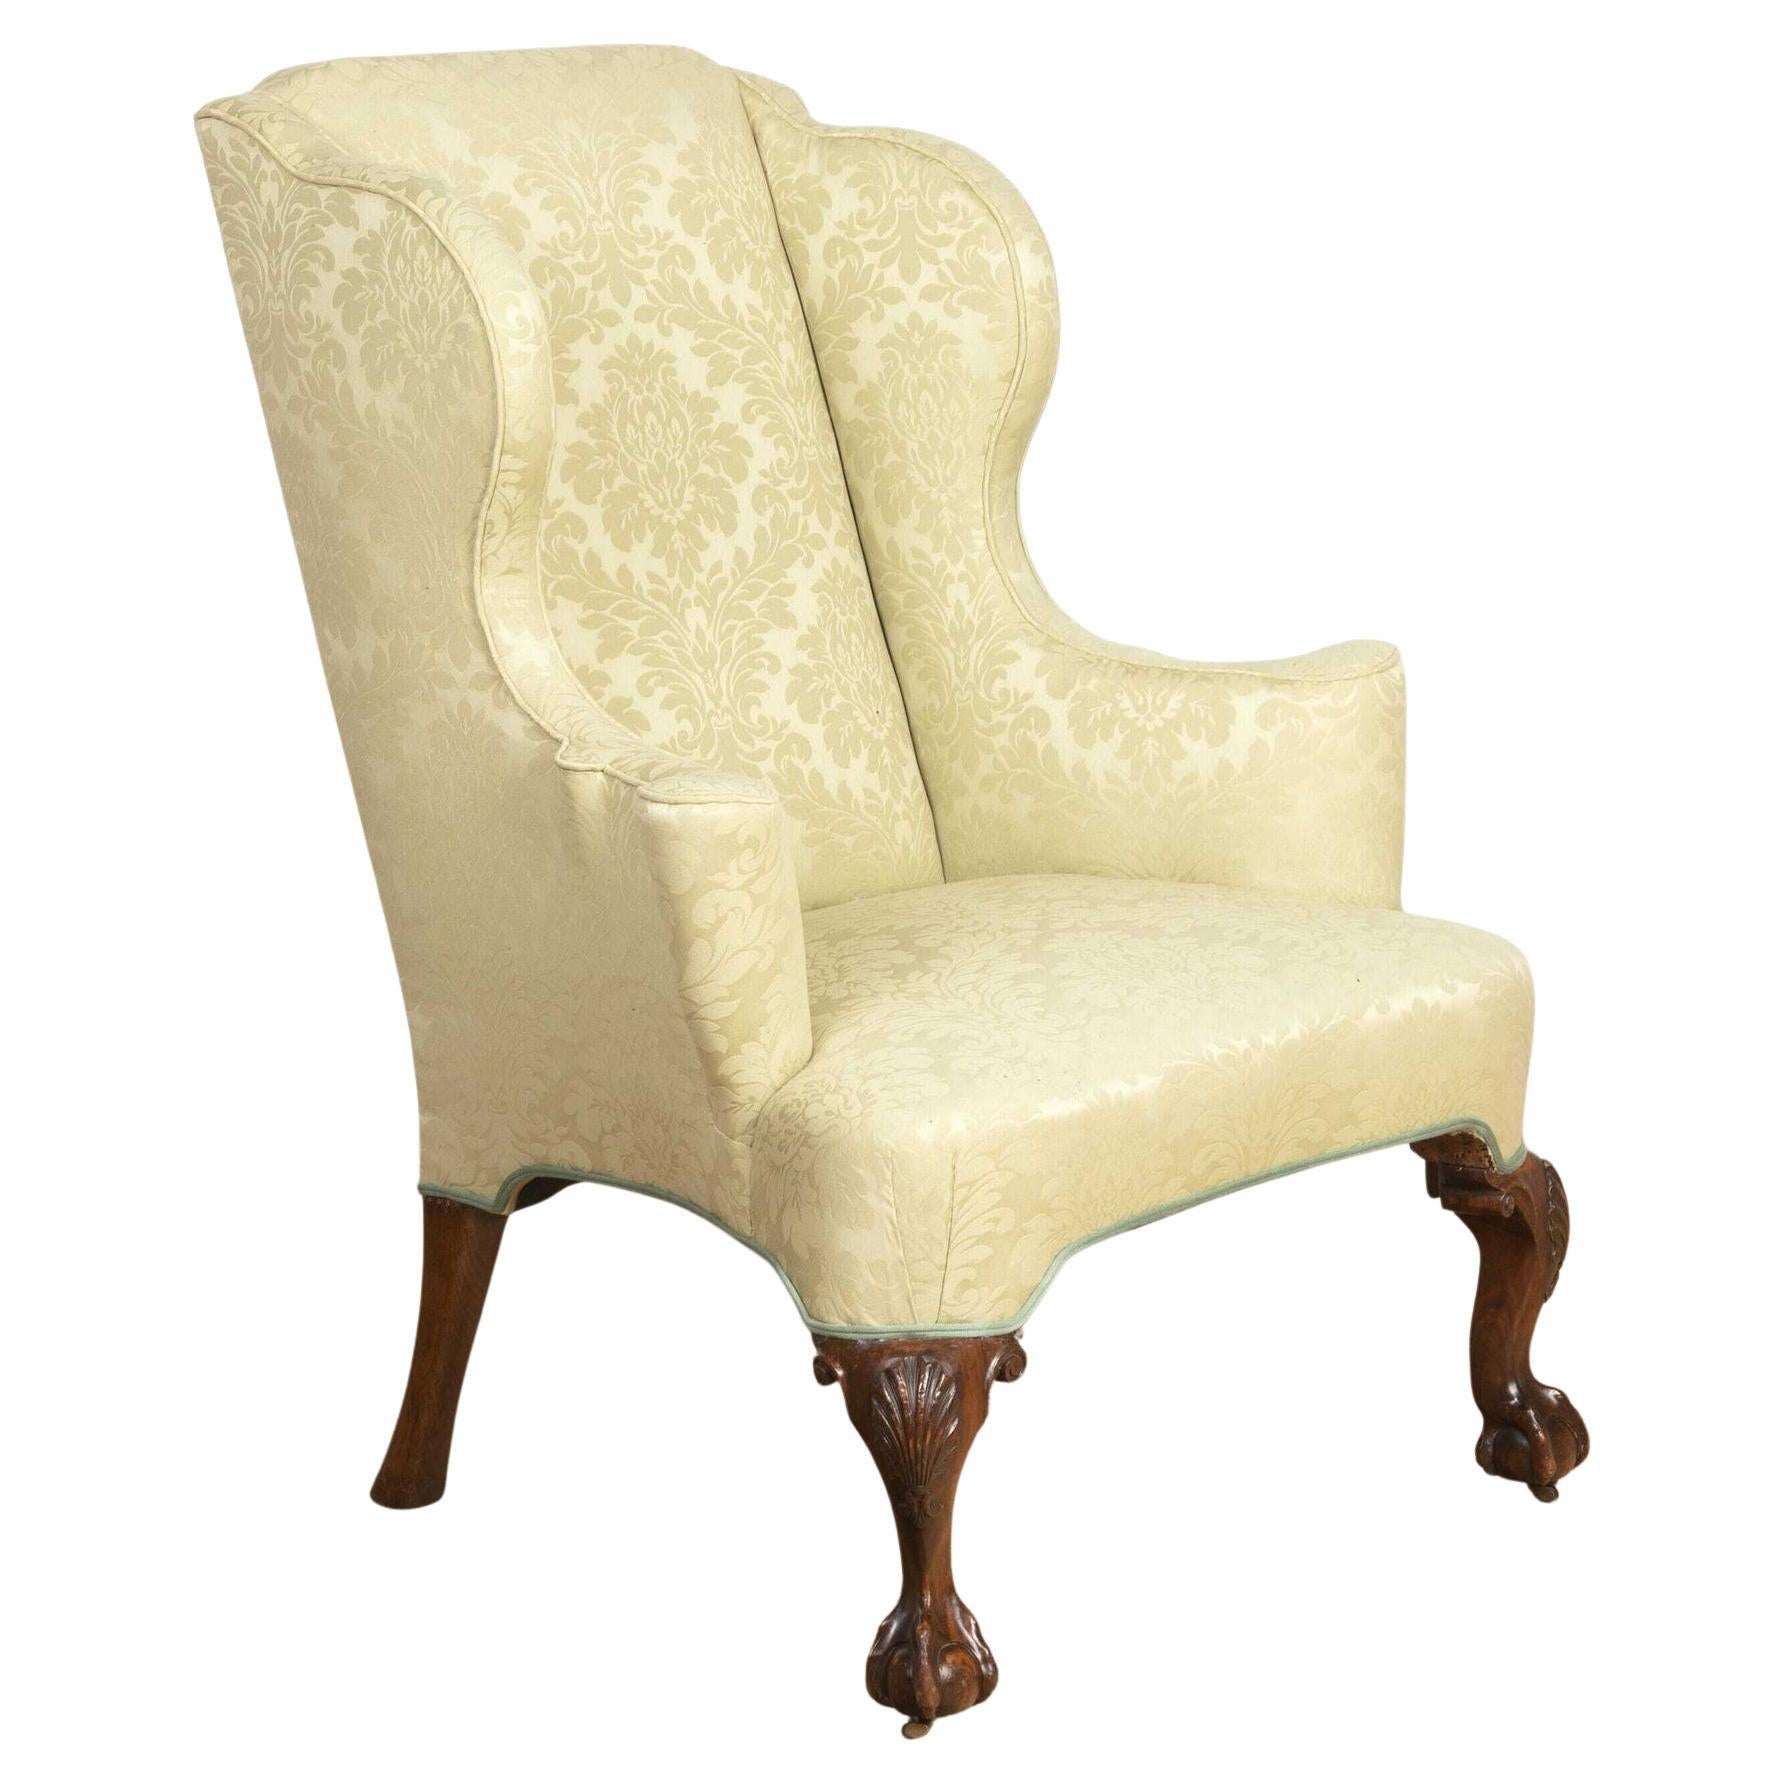 19th Century Walnut Ball and Claw Wing Chair